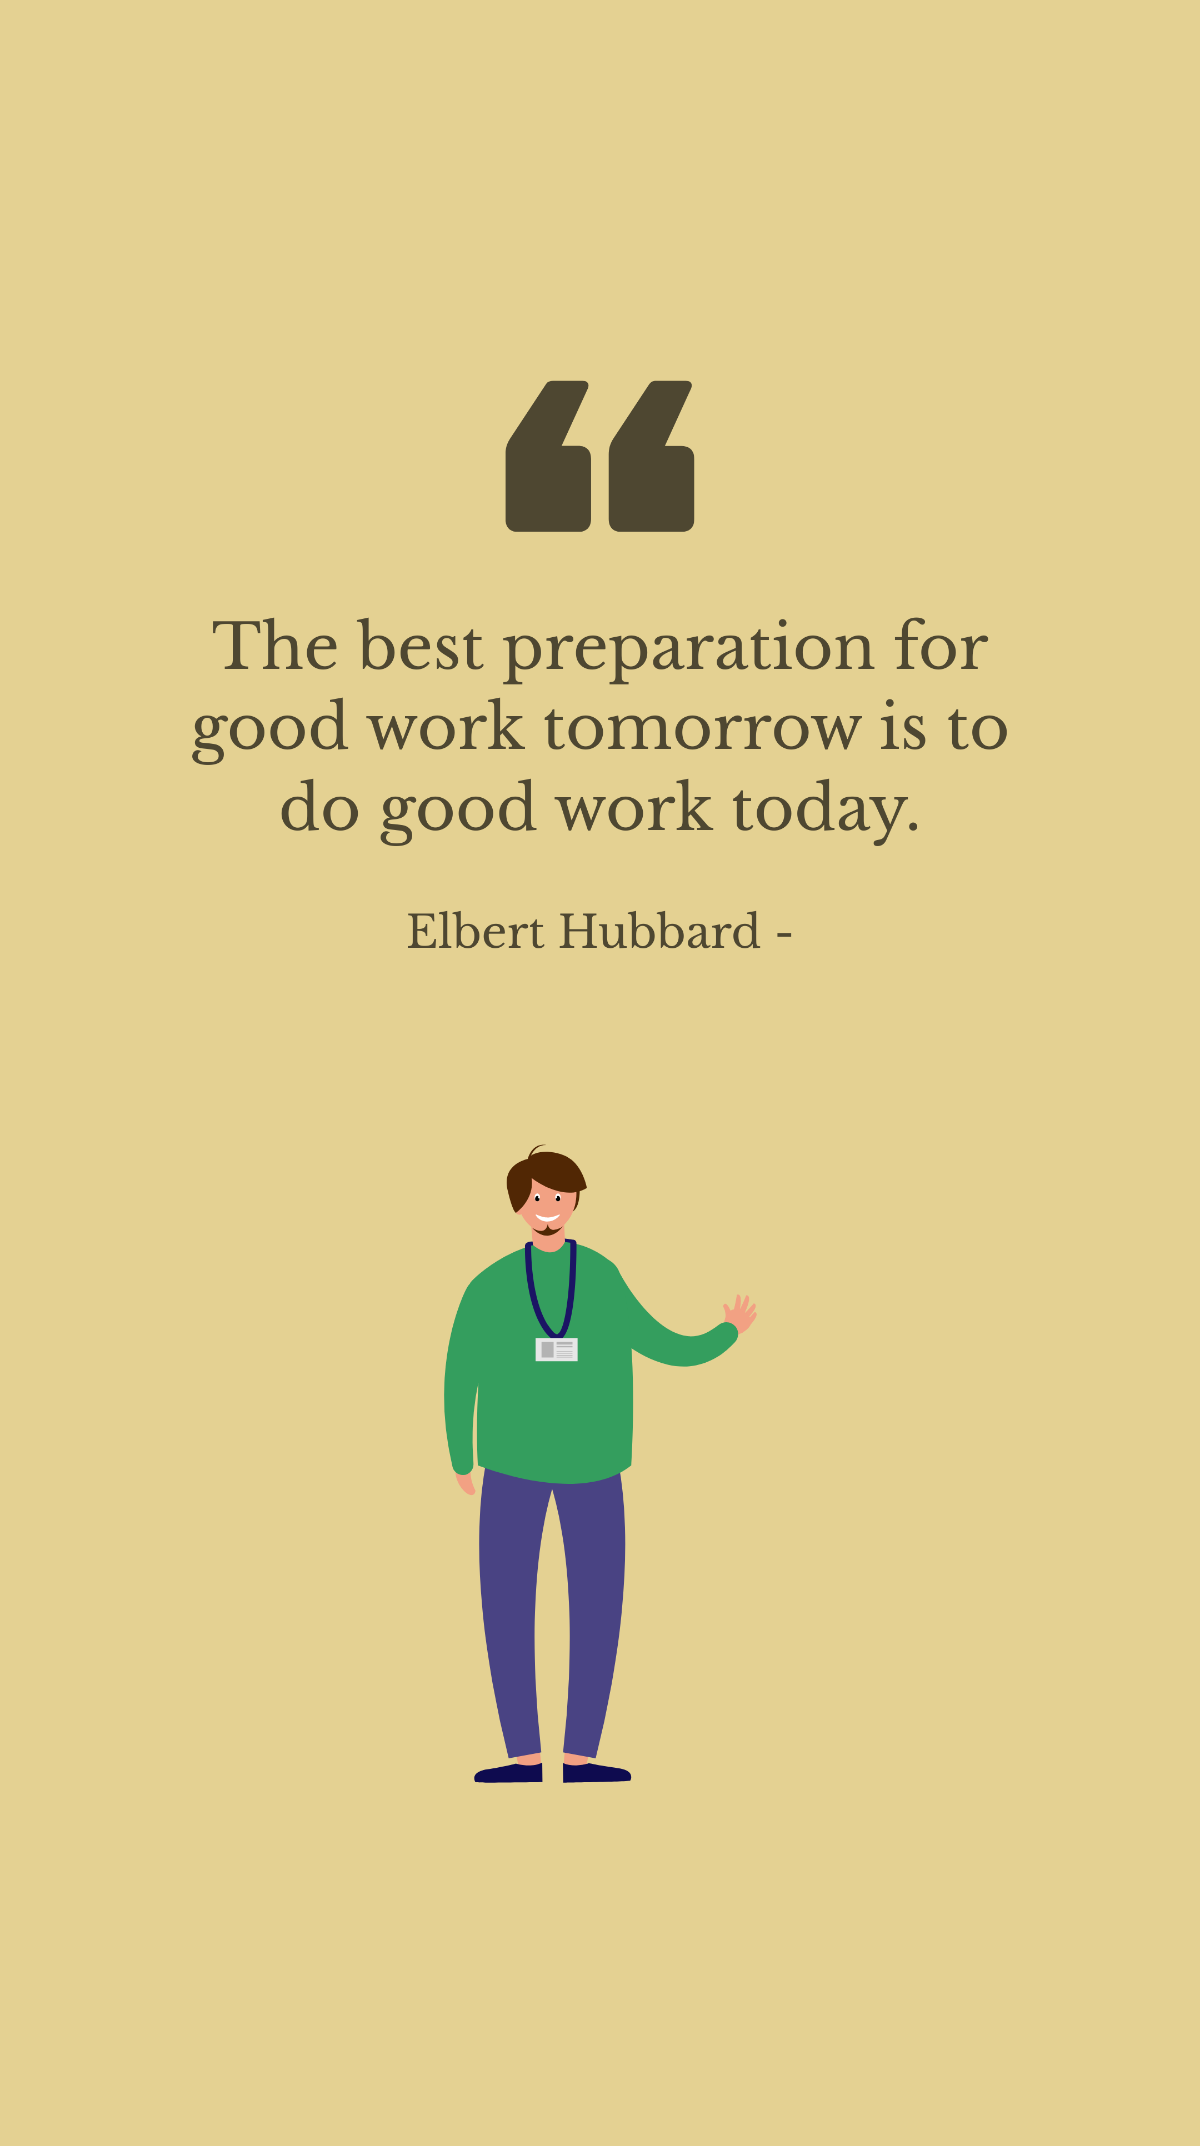 Elbert Hubbard - The best preparation for good work tomorrow is to do good work today. Template